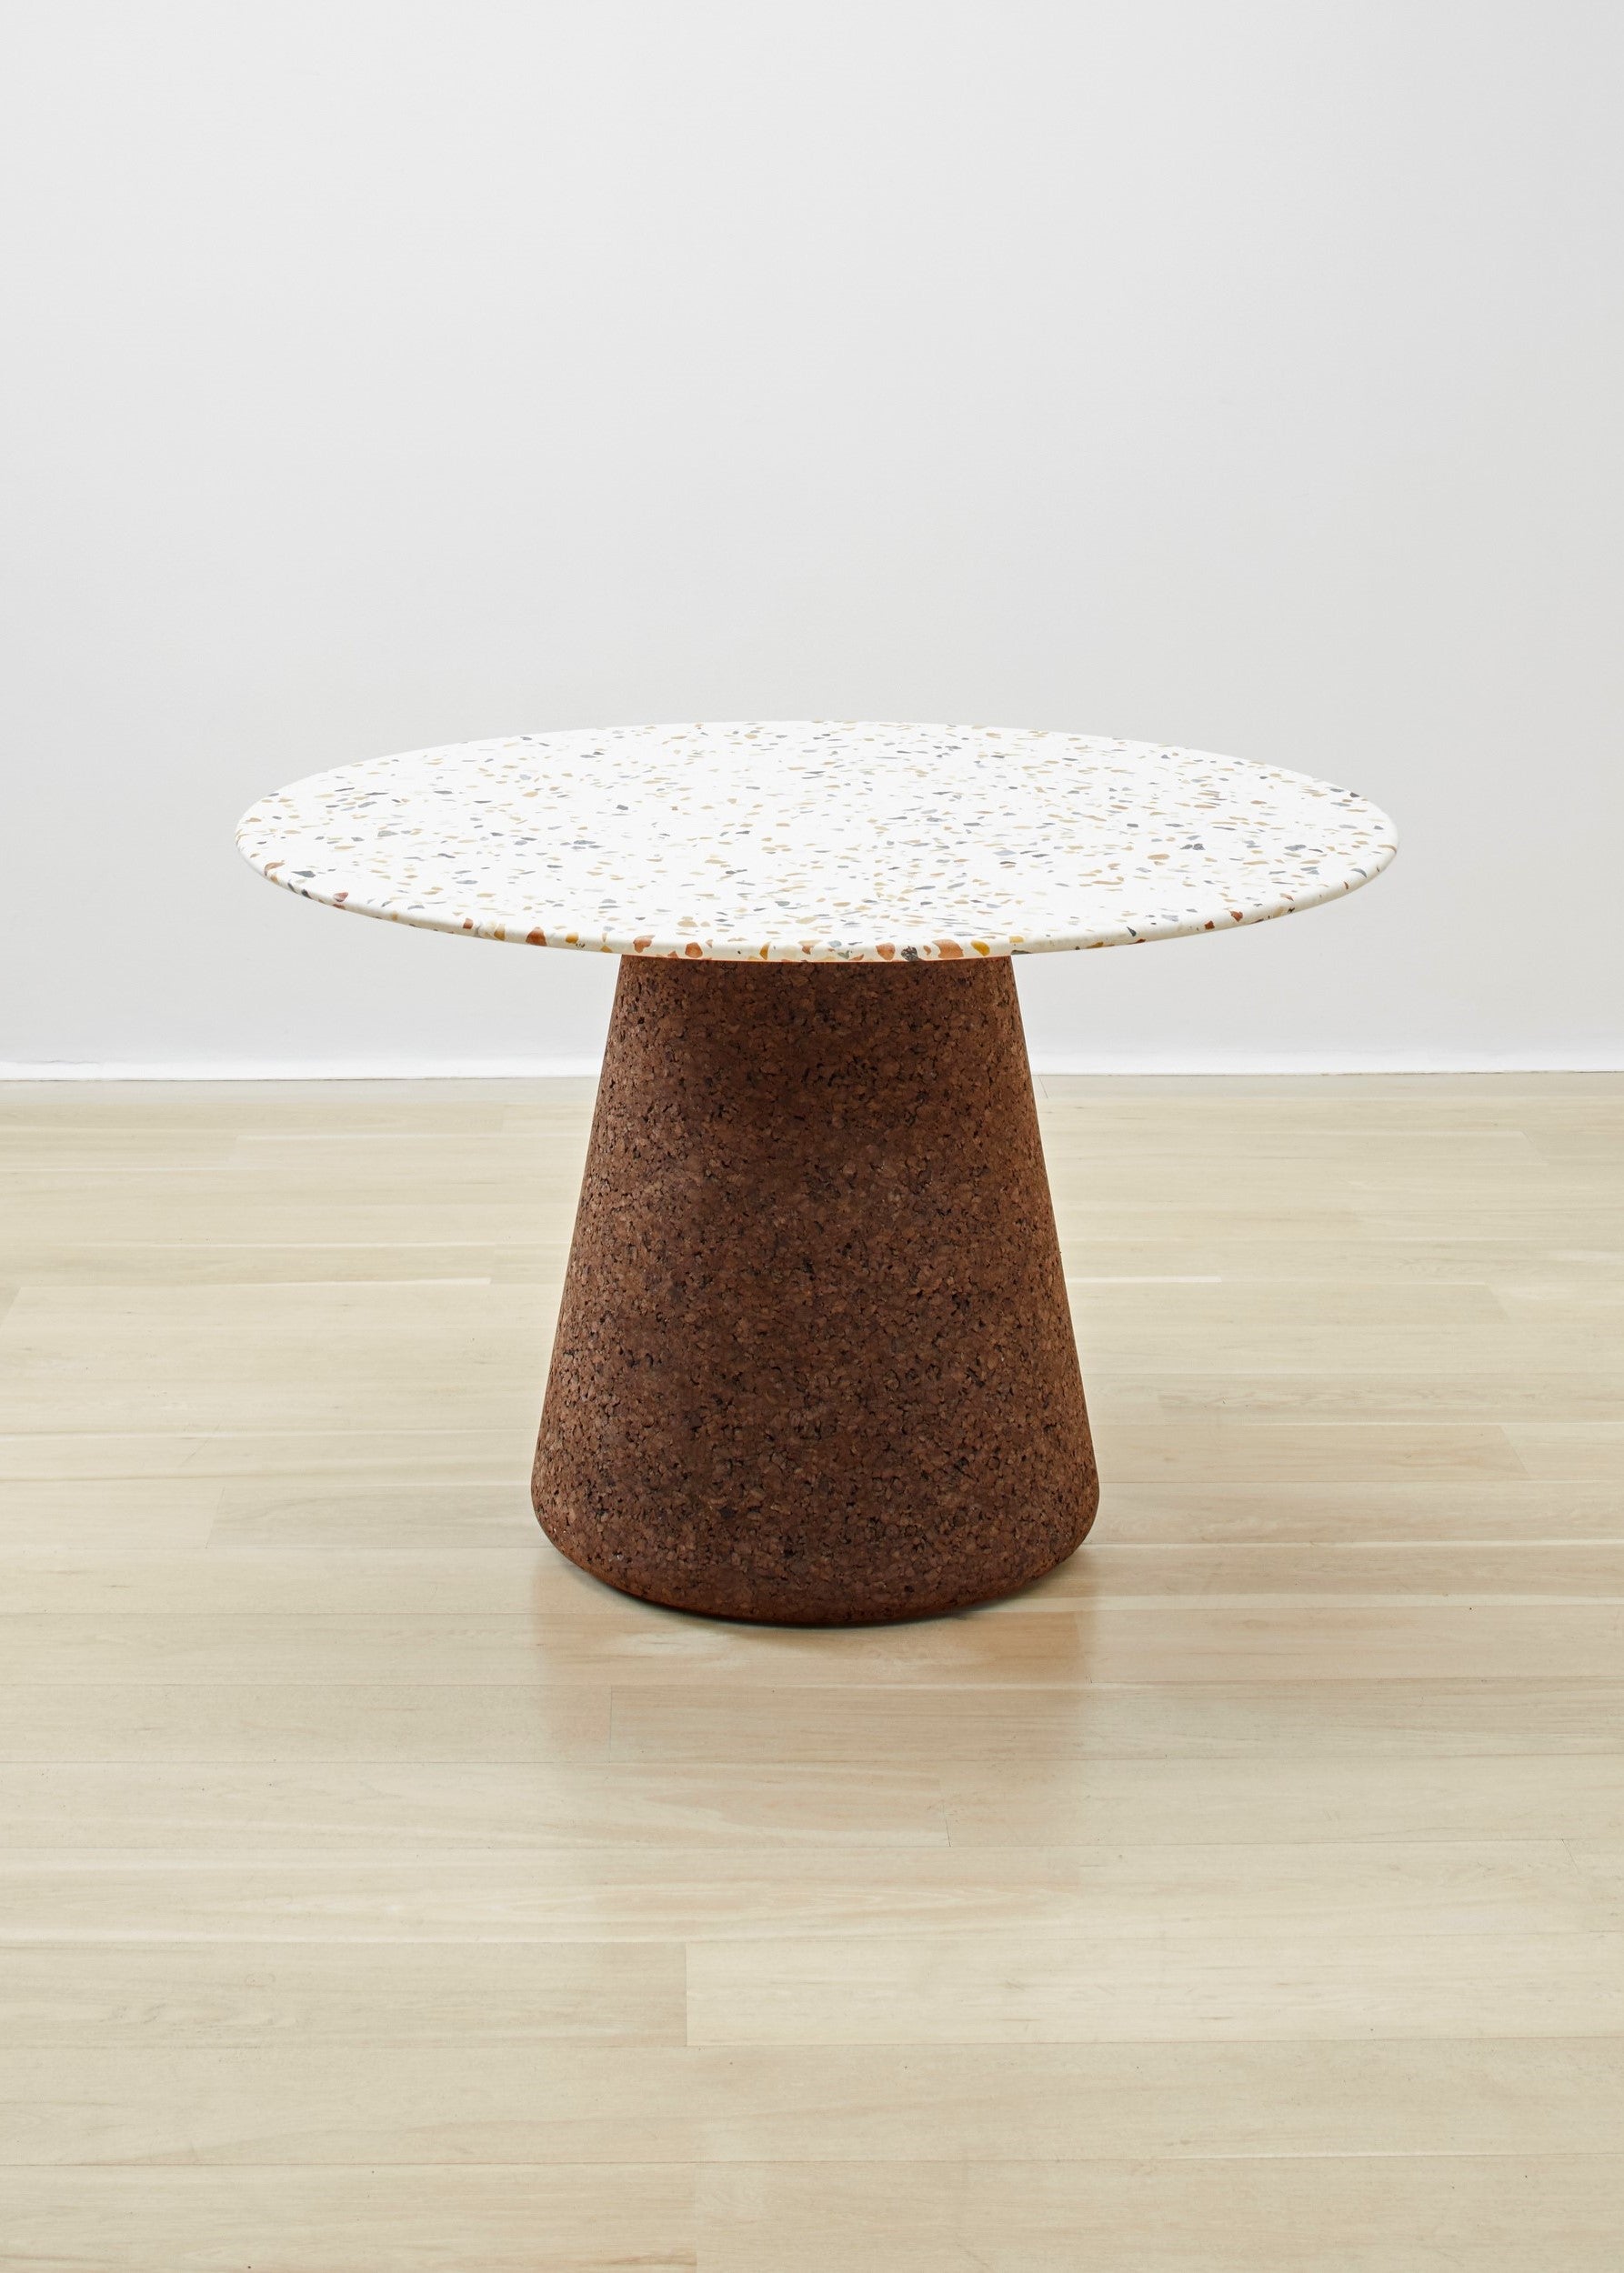 Elegant Kanju's Wiid Terrazzo and Cork Dining Table in Dark Cork, a masterpiece by Wiid Design, combines the raw beauty of terrazzo with the warmth of dark cork. This luxurious dining table not only stands as a testament to sustainable design but also to modern craftsmanship, making it a focal point in any sophisticated dining space.